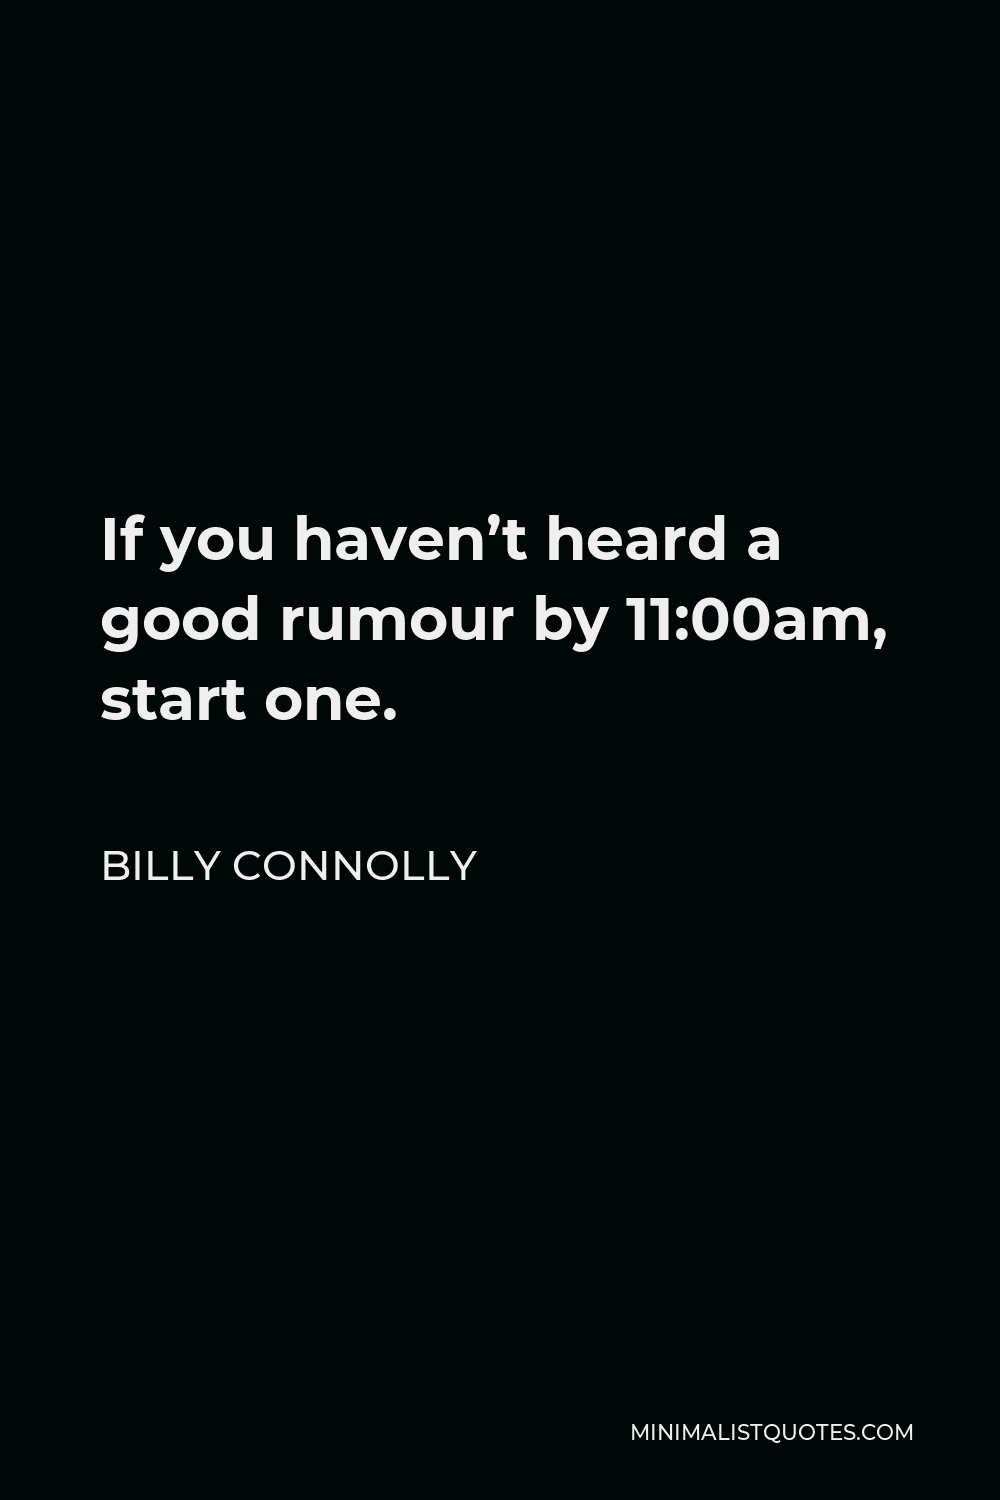 Billy Connolly Quote - If you haven’t heard a good rumour by 11:00am, start one.